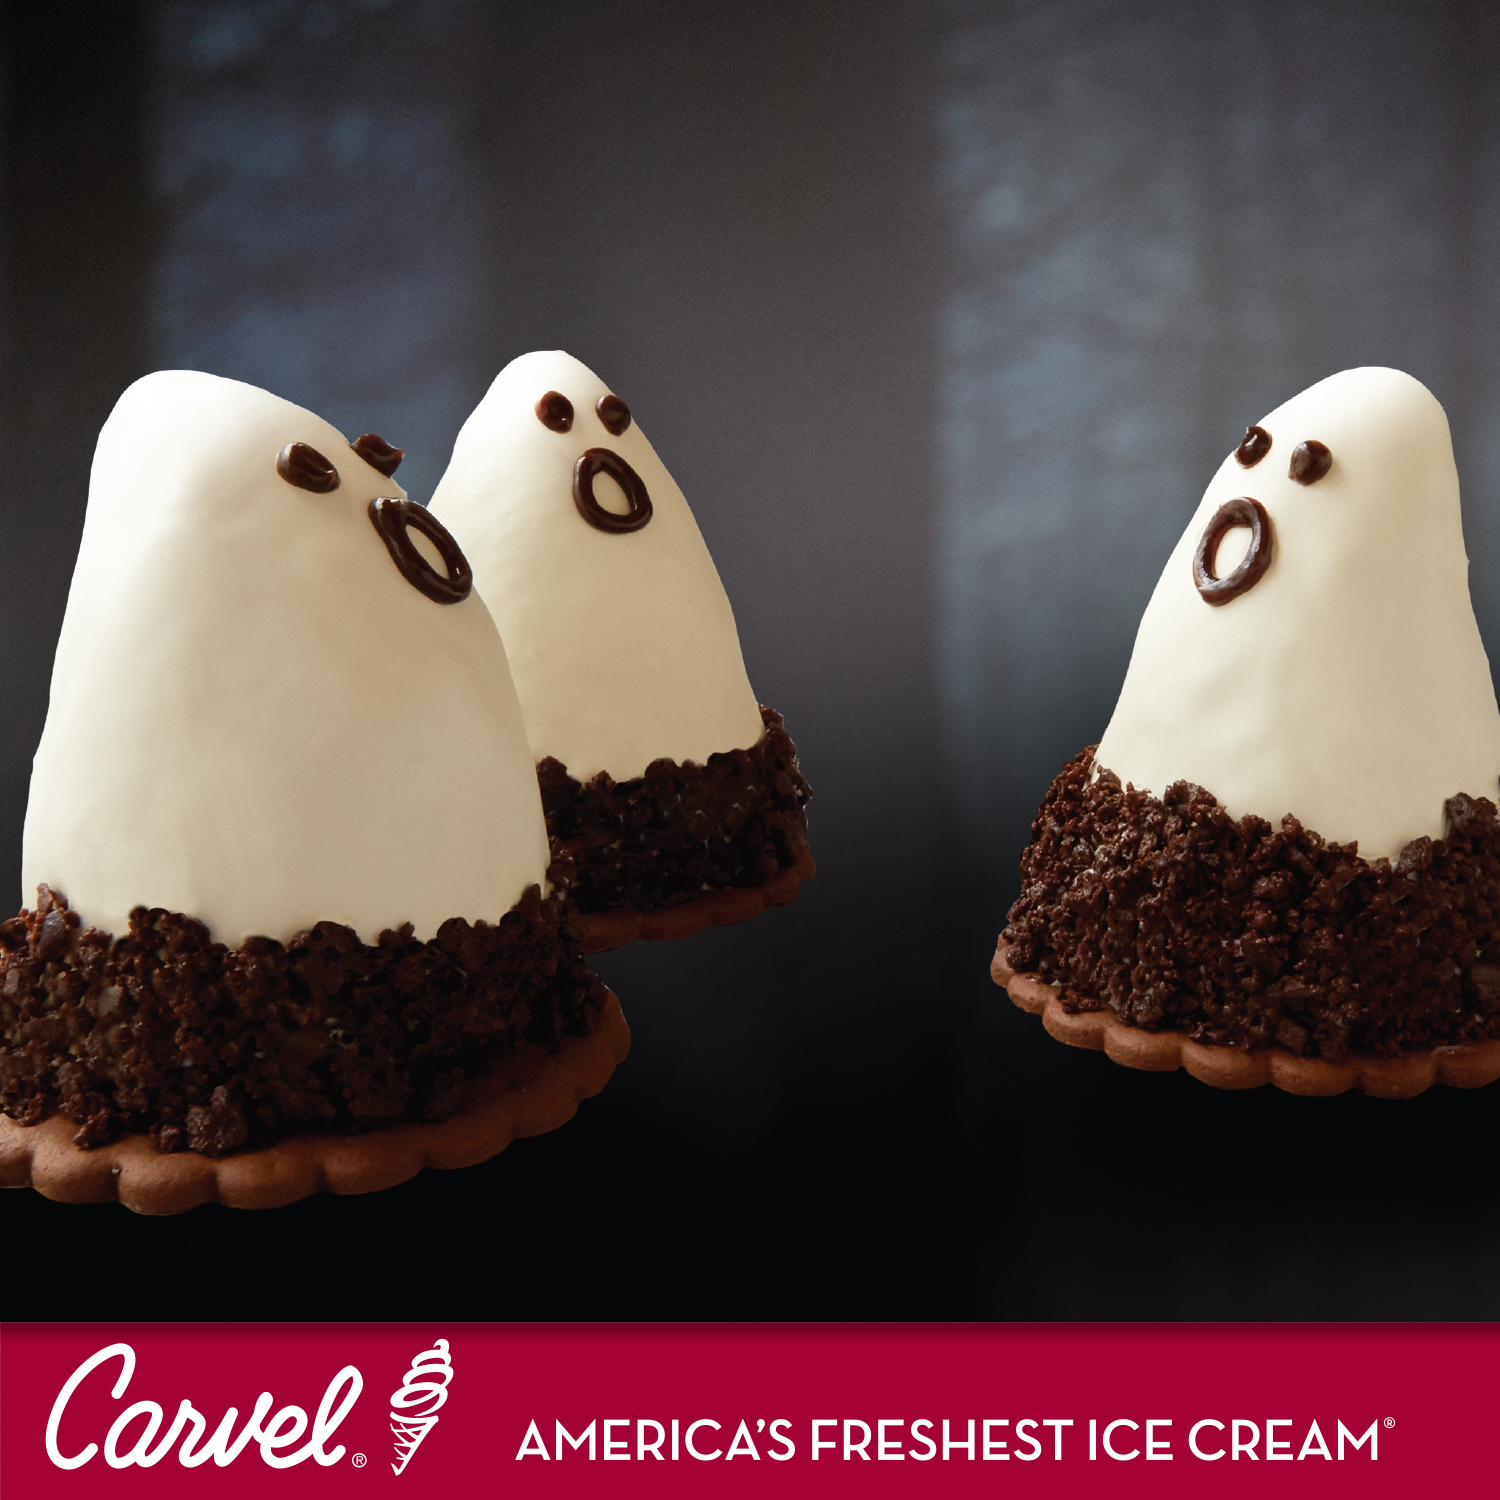 Carvel announces the return of its delicious Lil’ Screamers Novelty Treats 